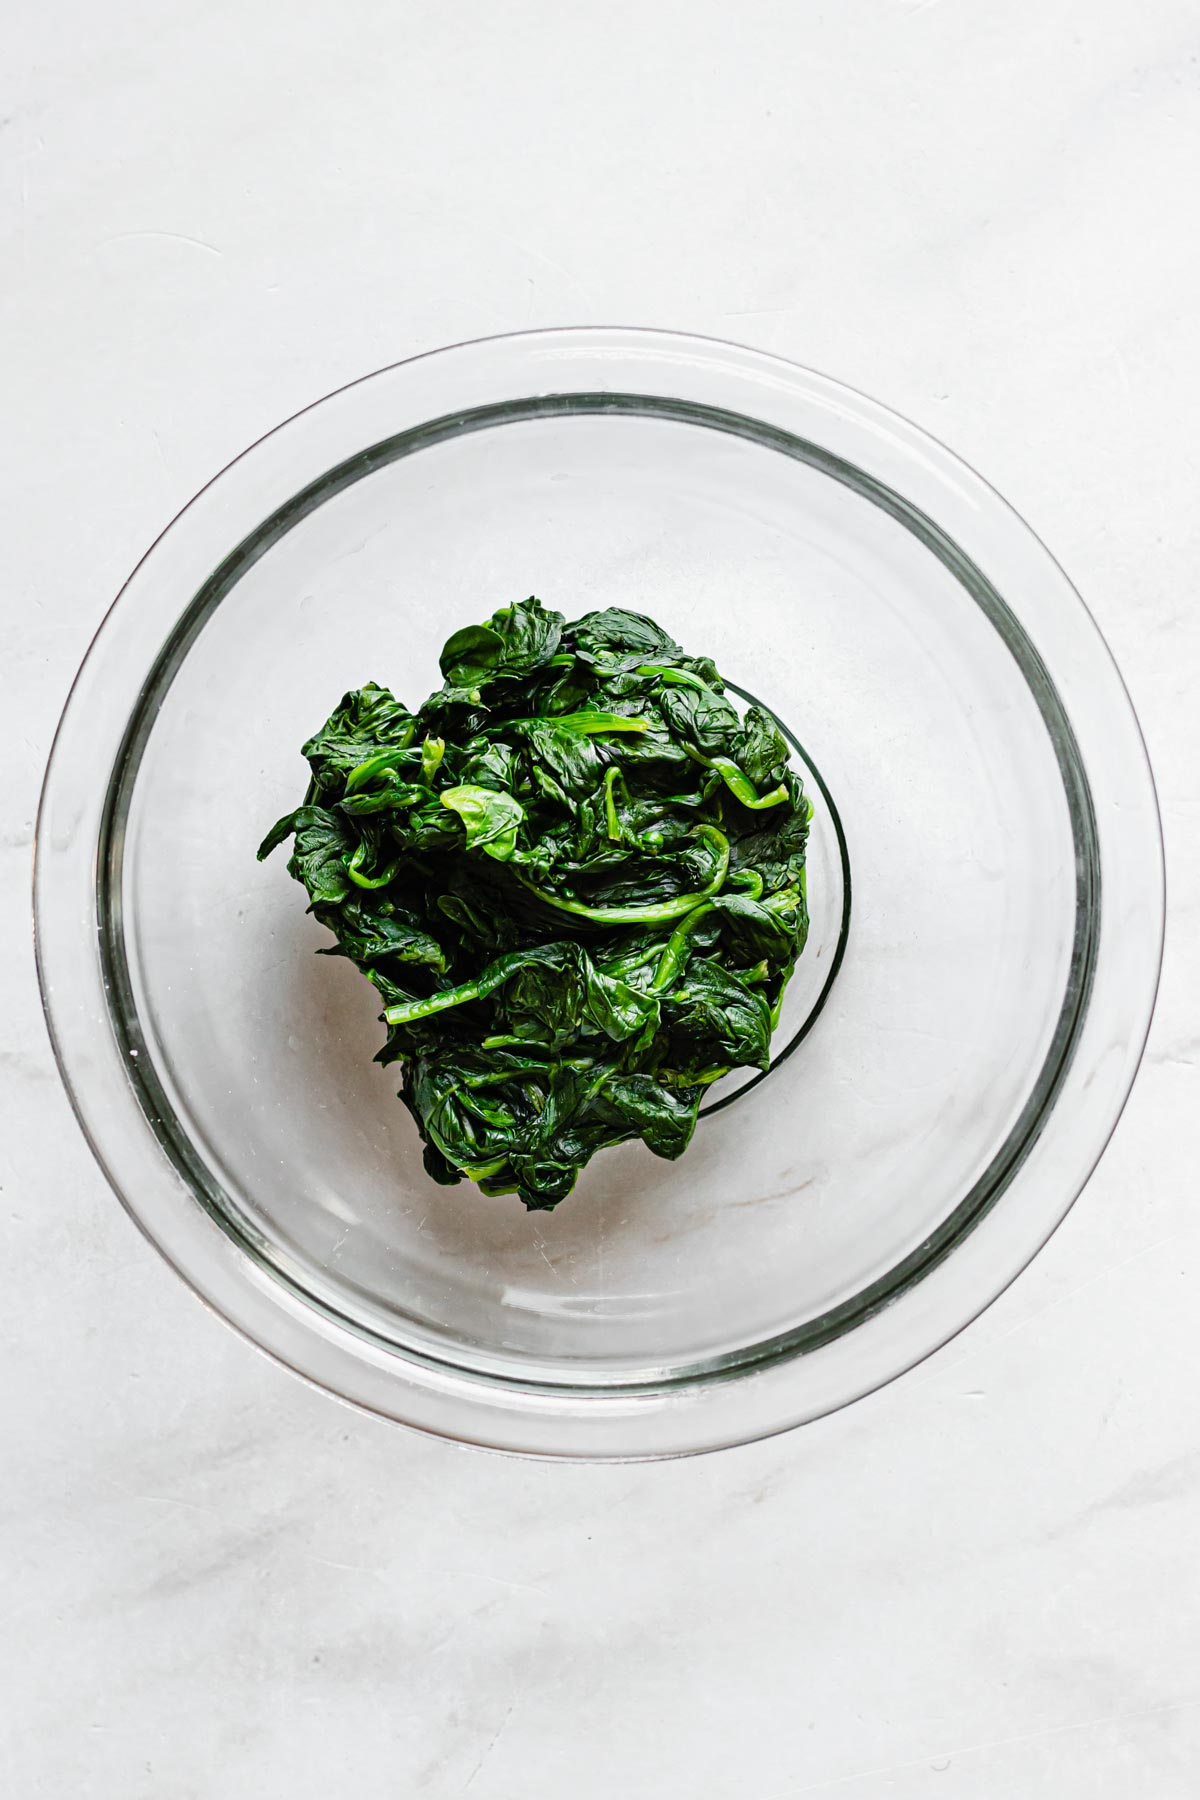 Ball of spinach in a bowl.